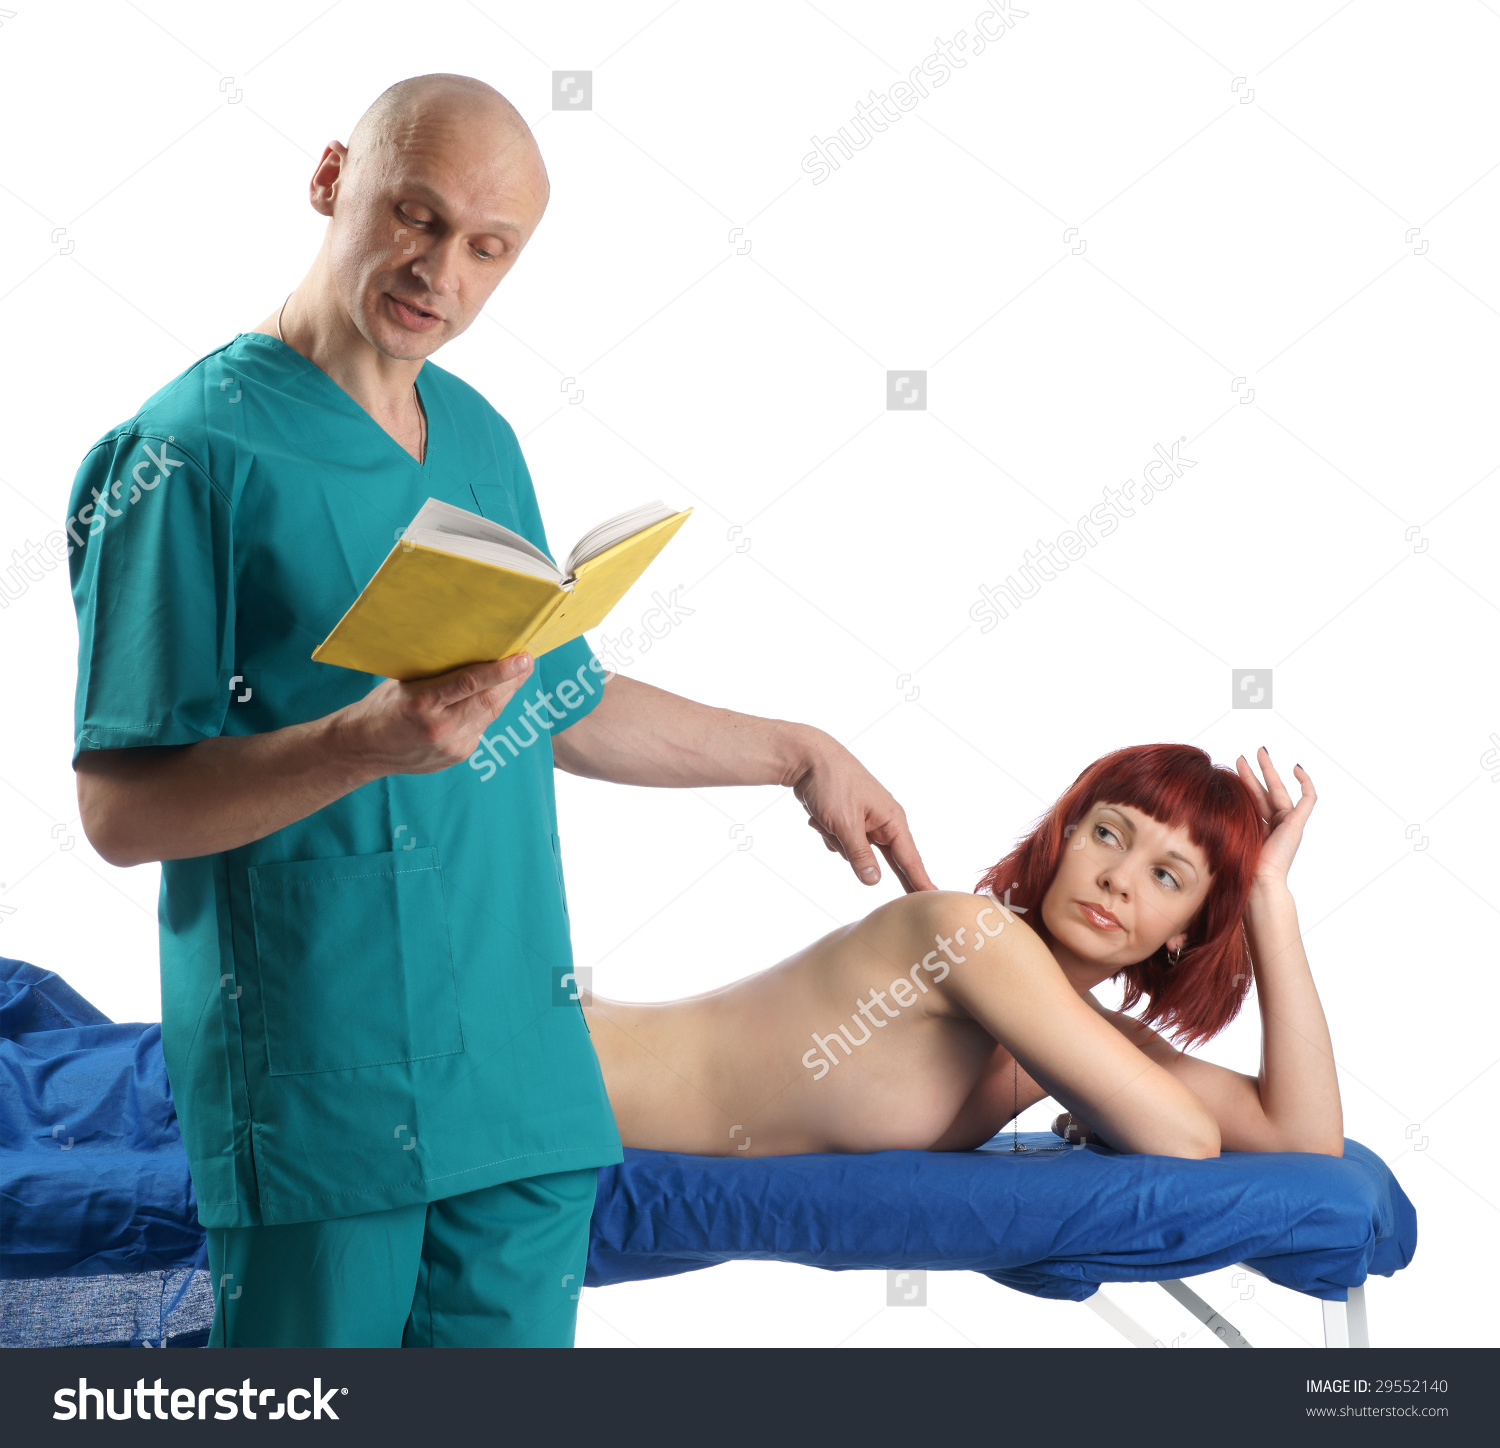 stock-photo-scene-with-massage-therapist-and-his-angry-client-isolated-on-white-29552140